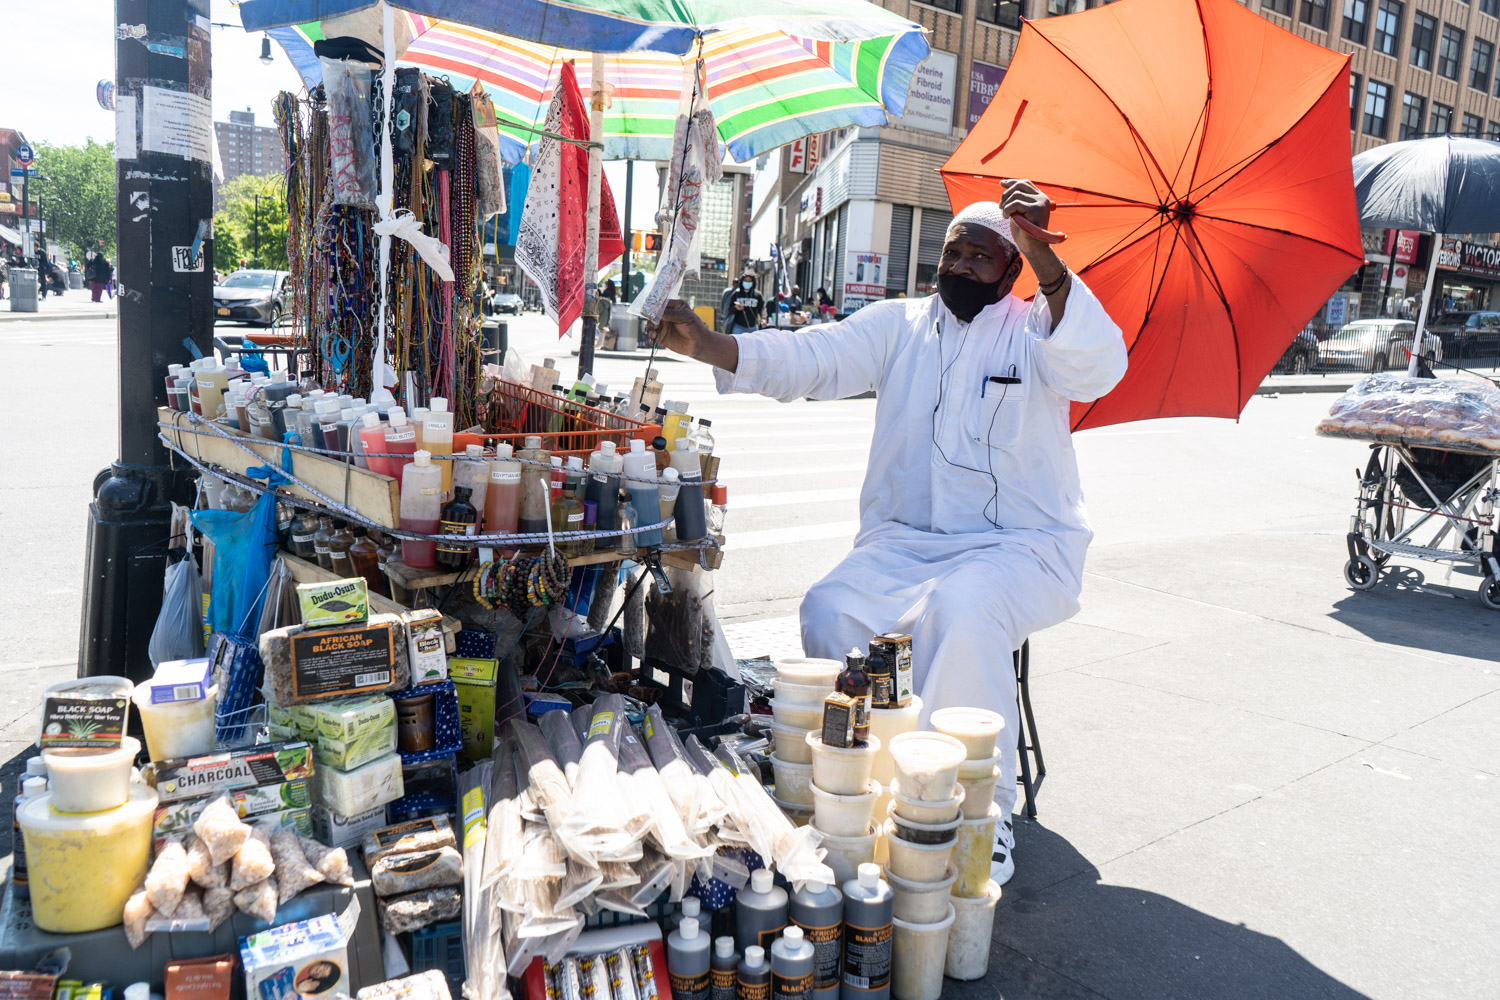 May 25, 2020: Street vendor selling African and West Indian imports, Third Avenue at East 149th Street, Bronx, New York. © Camilo José Vergara